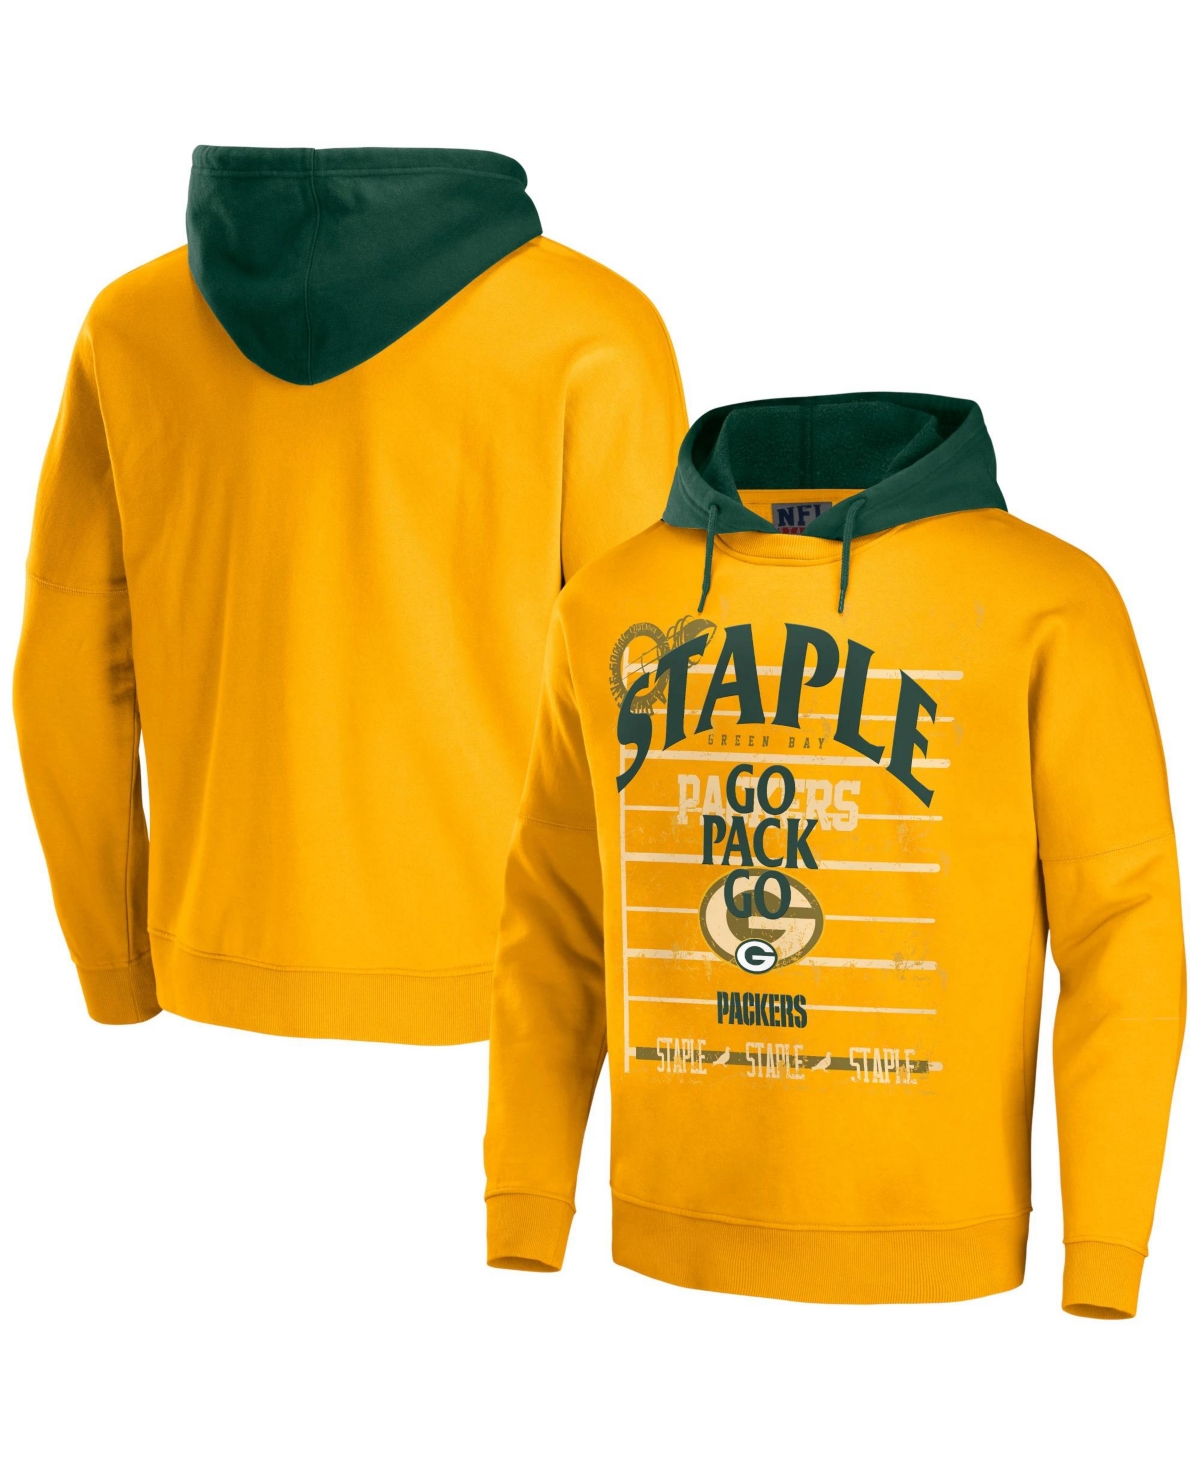 Shop Nfl Properties Men's Nfl X Staple Yellow Green Bay Packers Oversized Gridiron Vintage-like Wash Pullover Hoodie